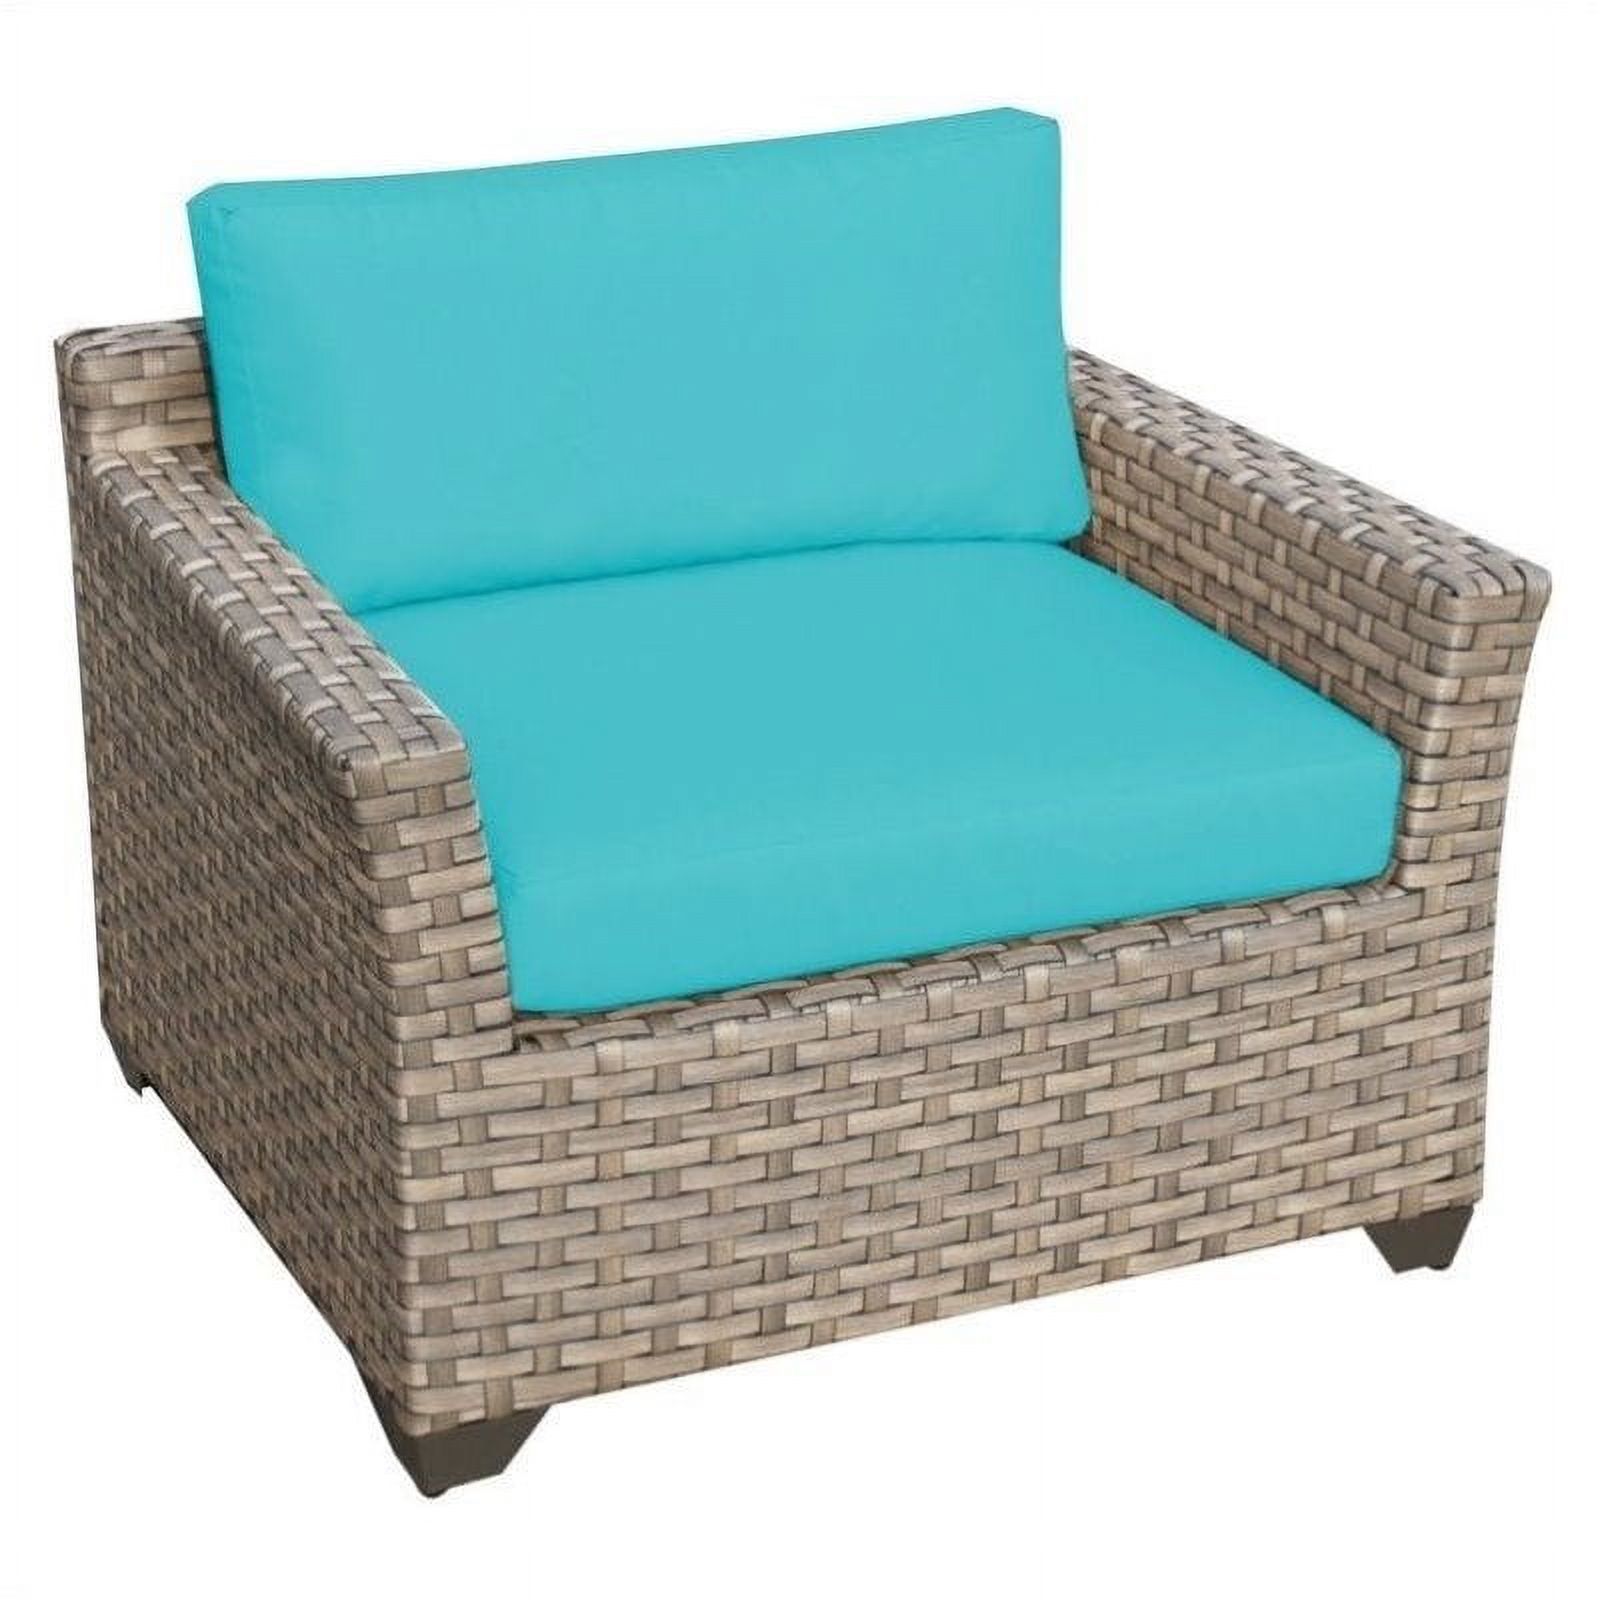 3 Piece Patio Furniture Set with Wickered Set of 2 Arm Chairs and Coffee Table in Summer Fog - image 3 of 4